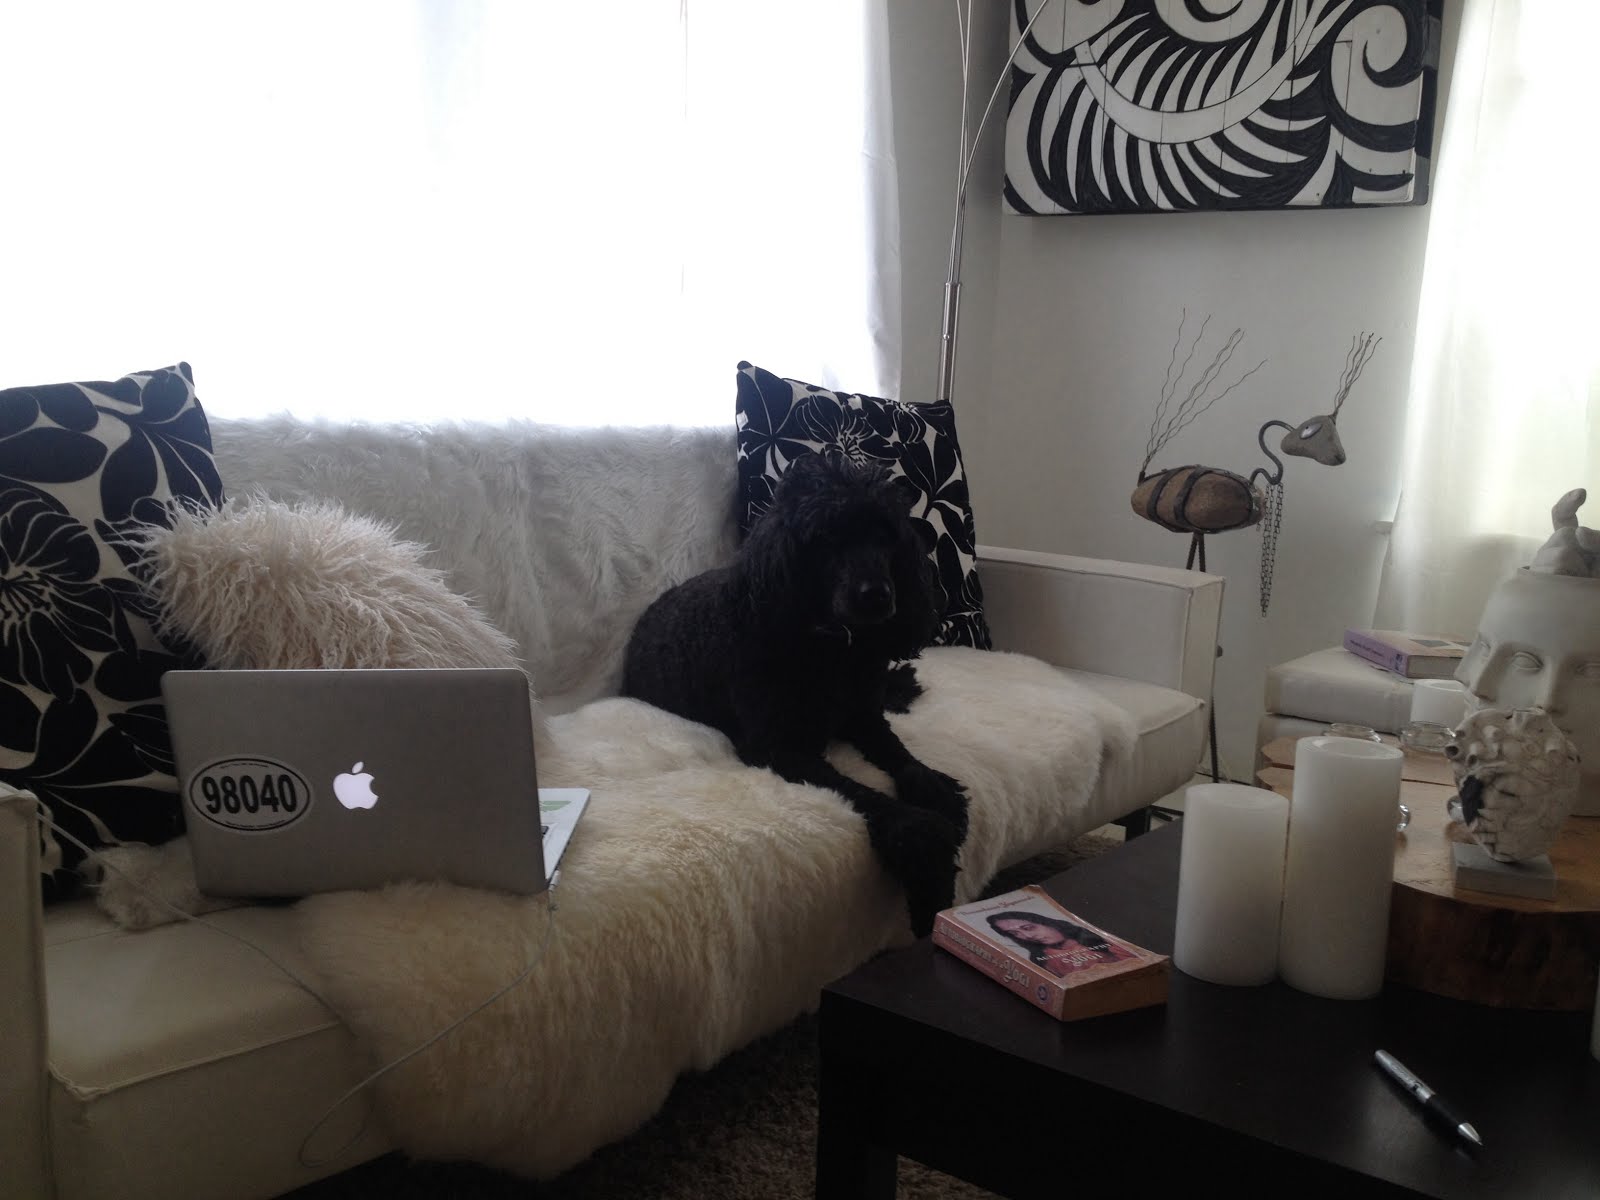 Poodle on a sofa... Checking emails